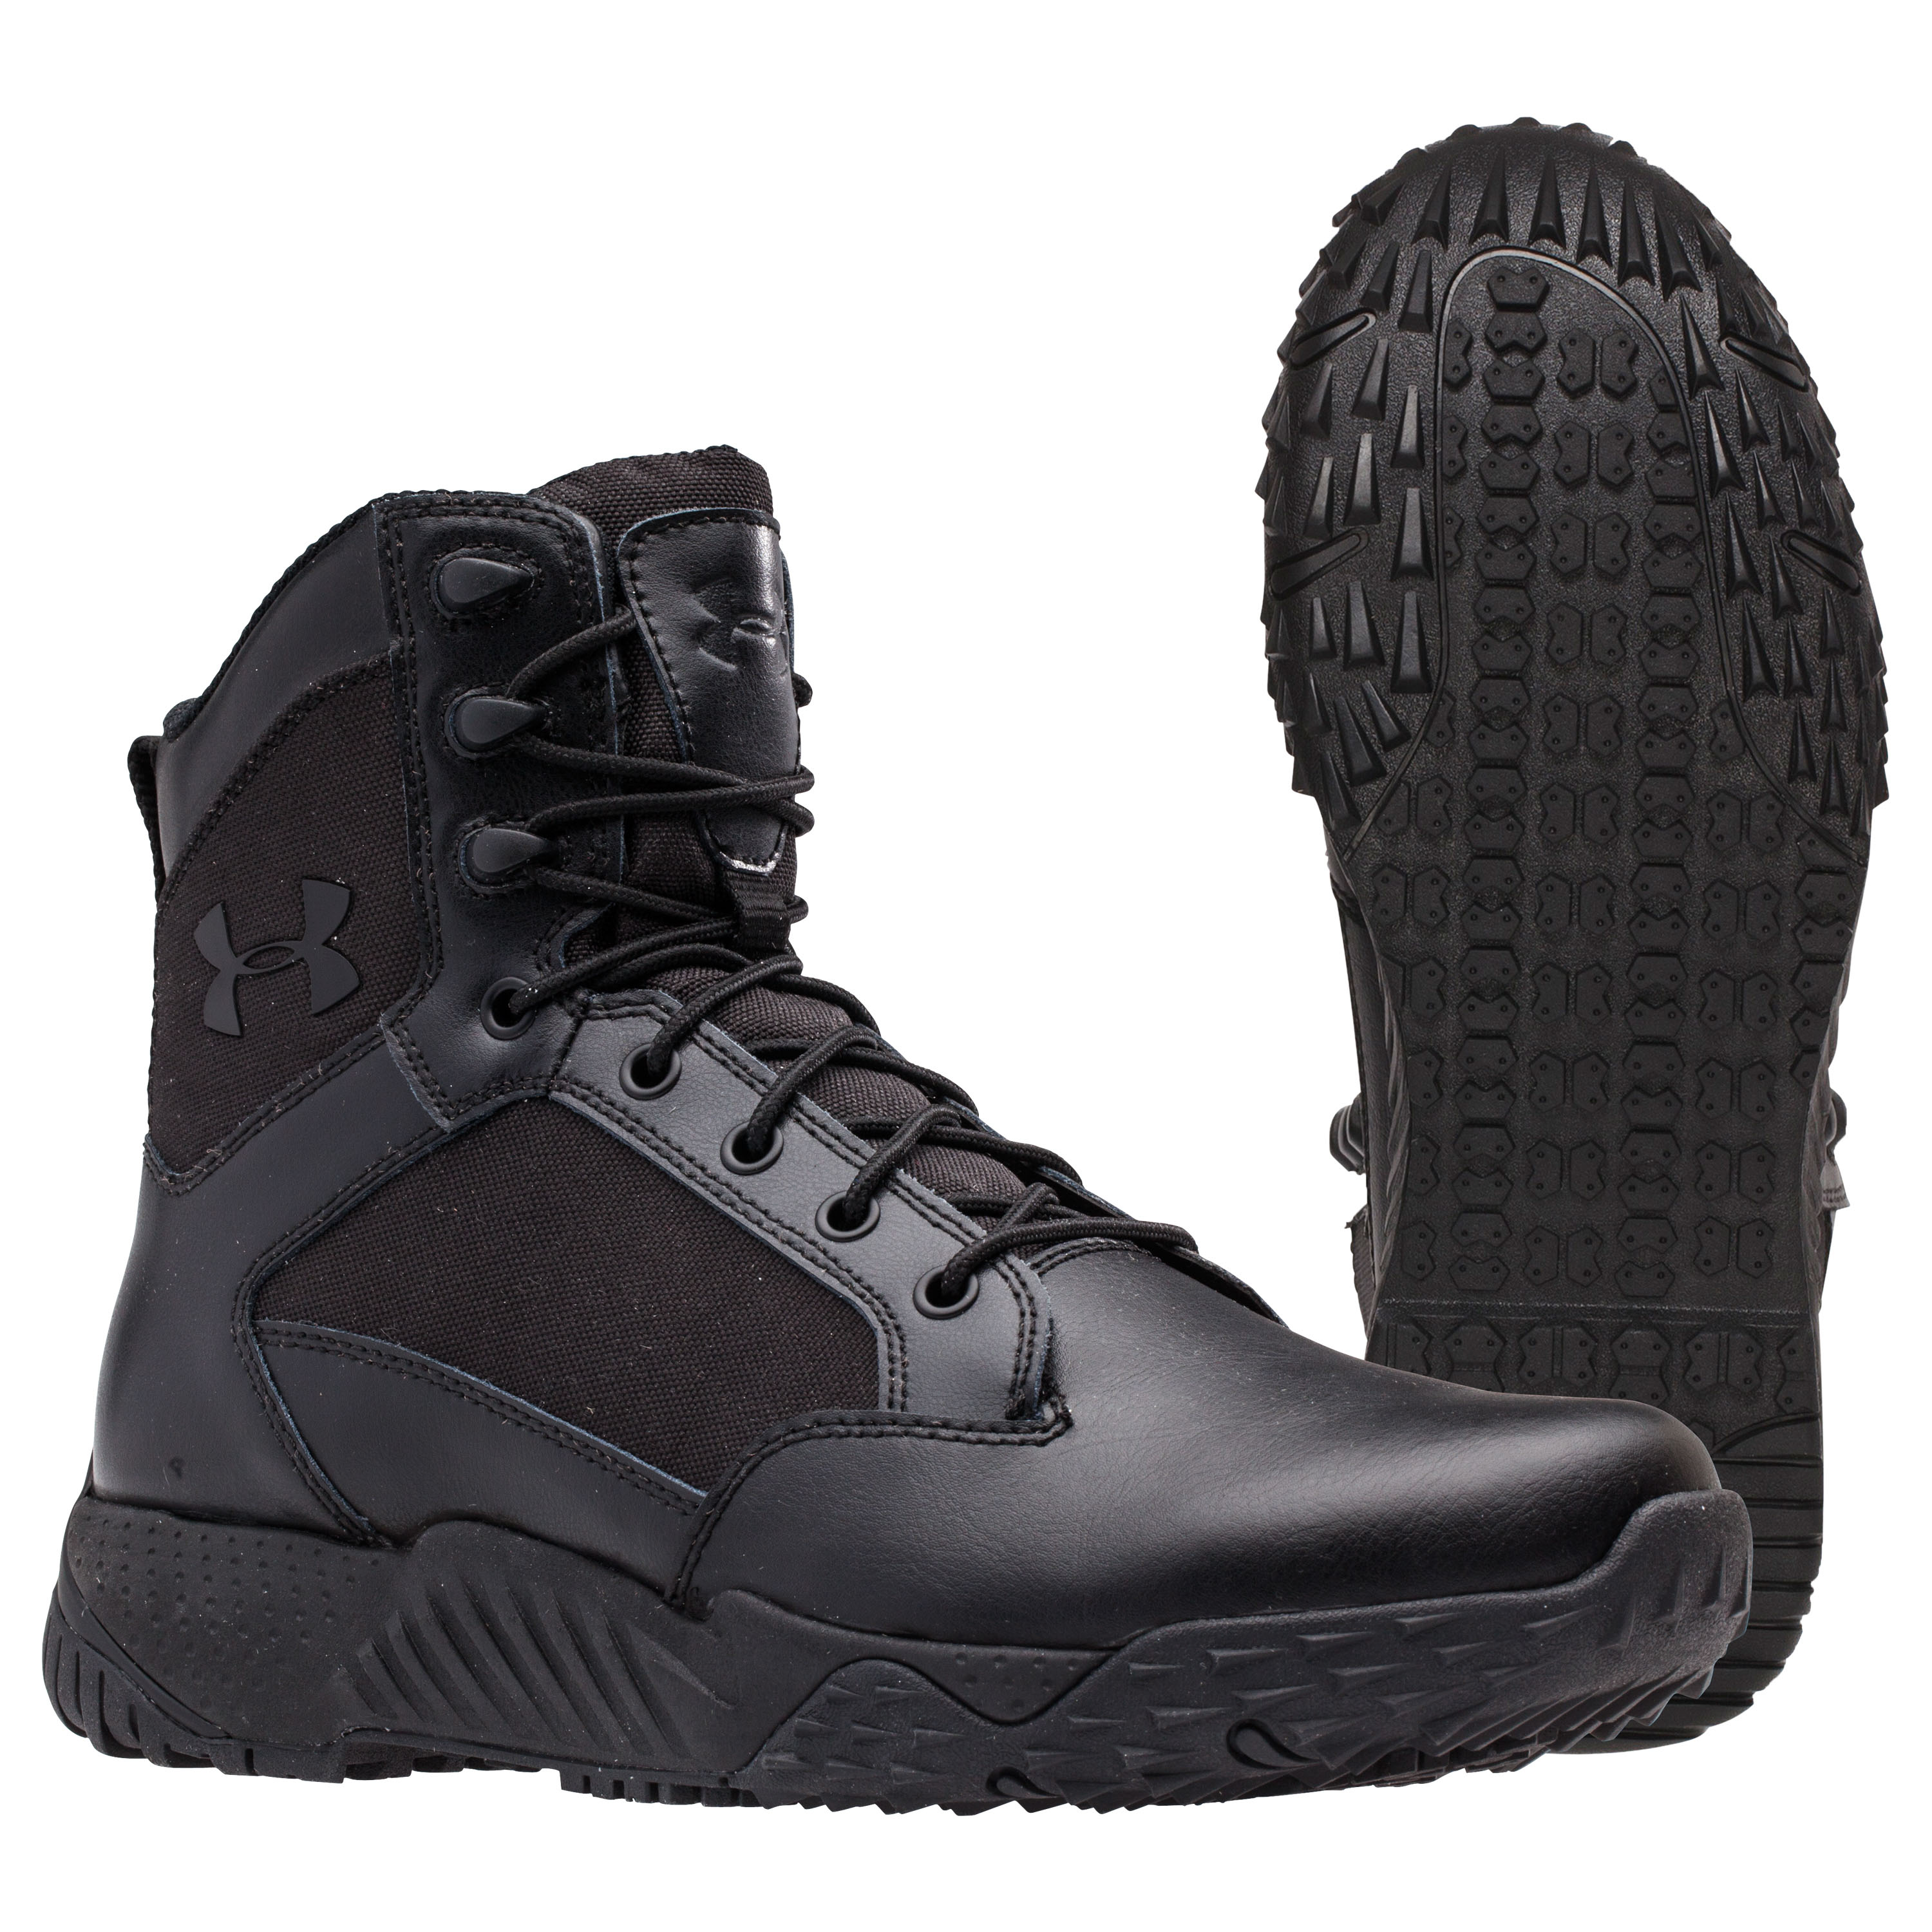 Under Armour Tactical Boots Stellar black